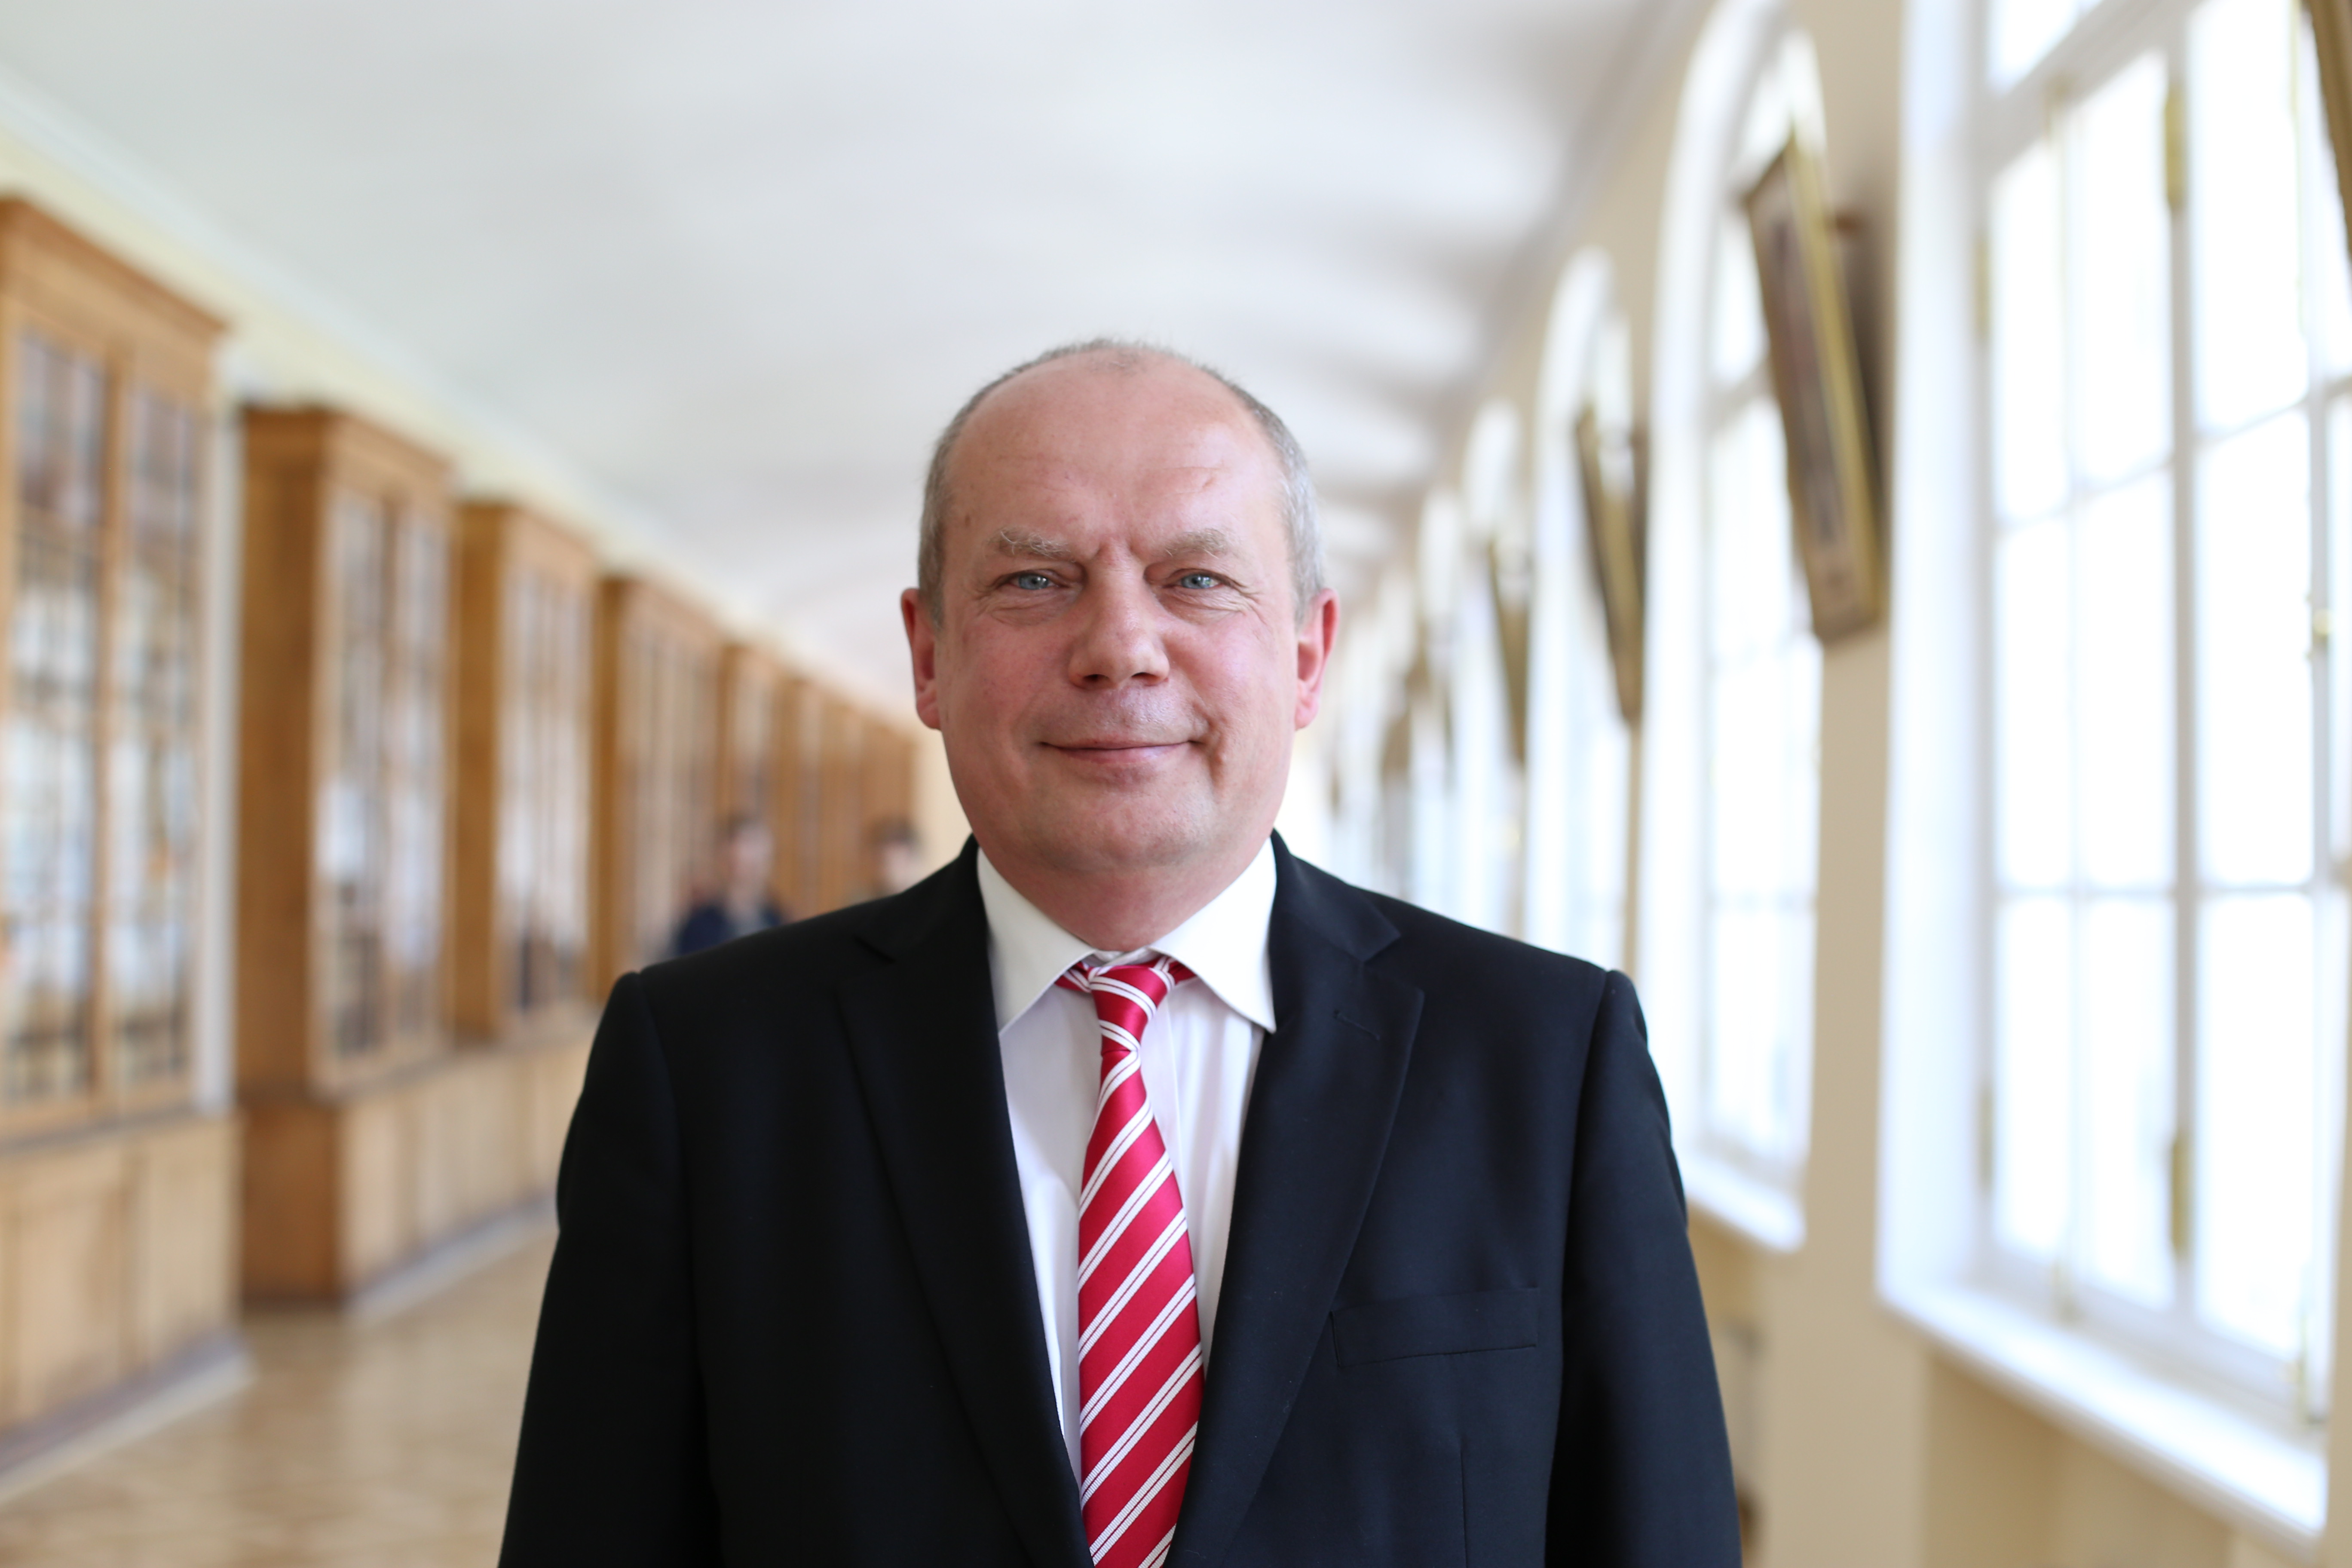 St. Petersburg University's Vice-Rector for Research, Sergei Allonov.